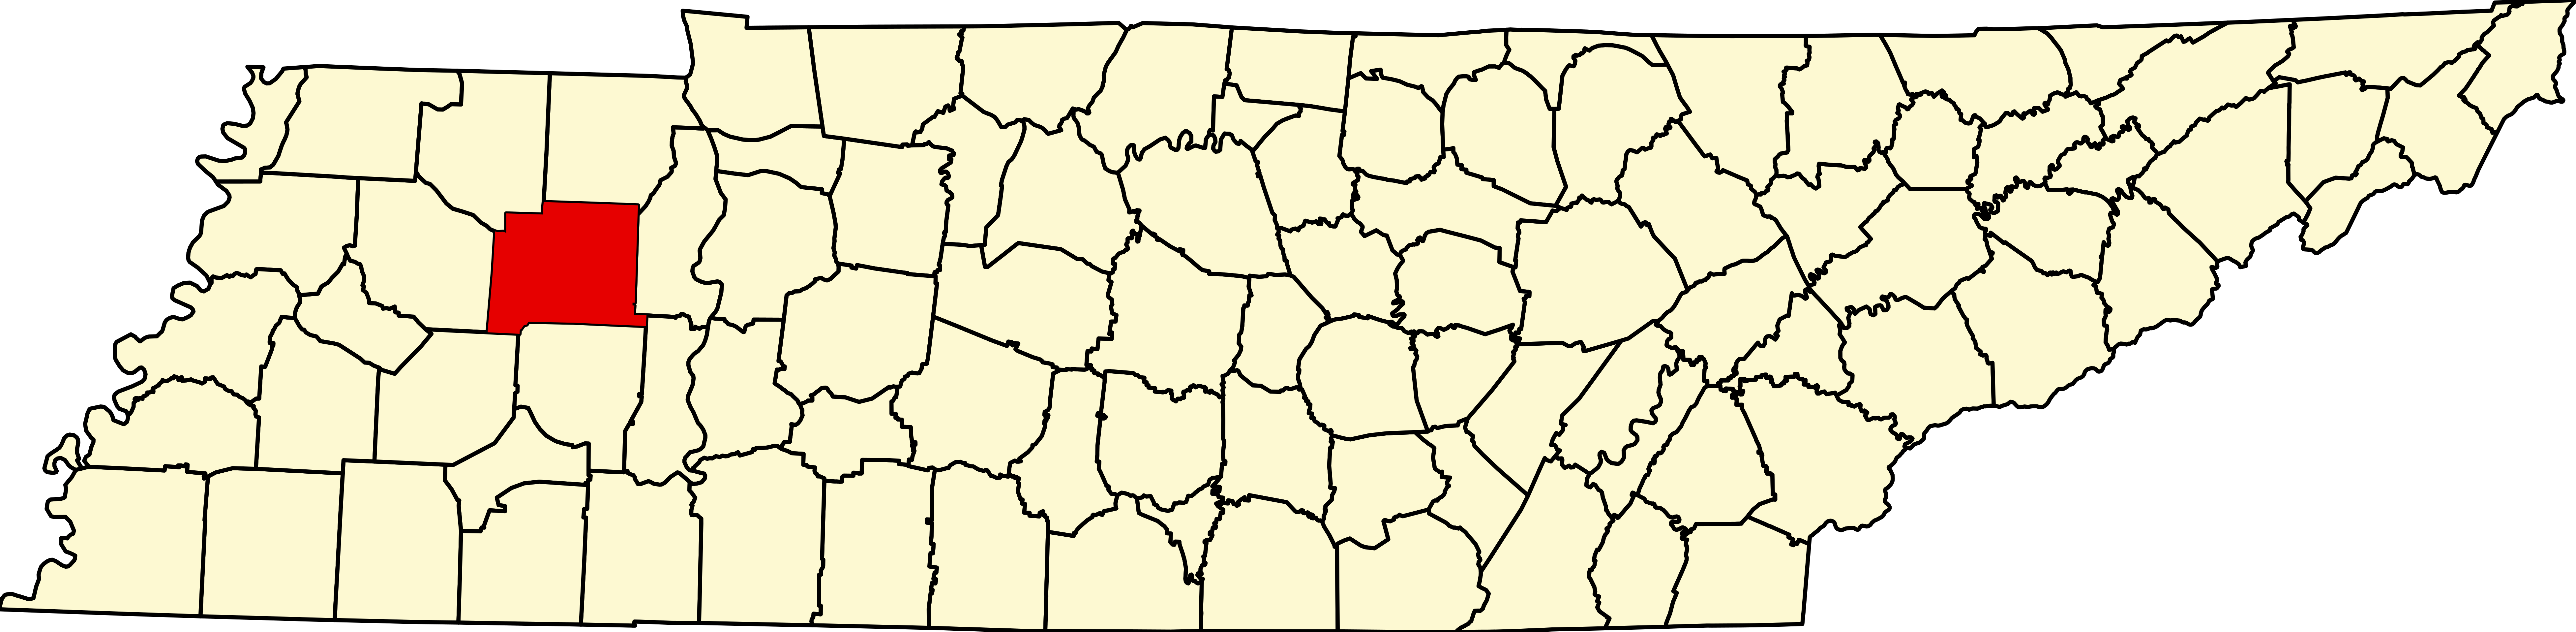 upload.wikimedia.org/wikipedia/commons/thumb/0/0f/Map_of_Tennessee_highlighting_Carroll_County.svg/7814px-Map_of_Tennessee_highlighting_Carroll_County.svg.png